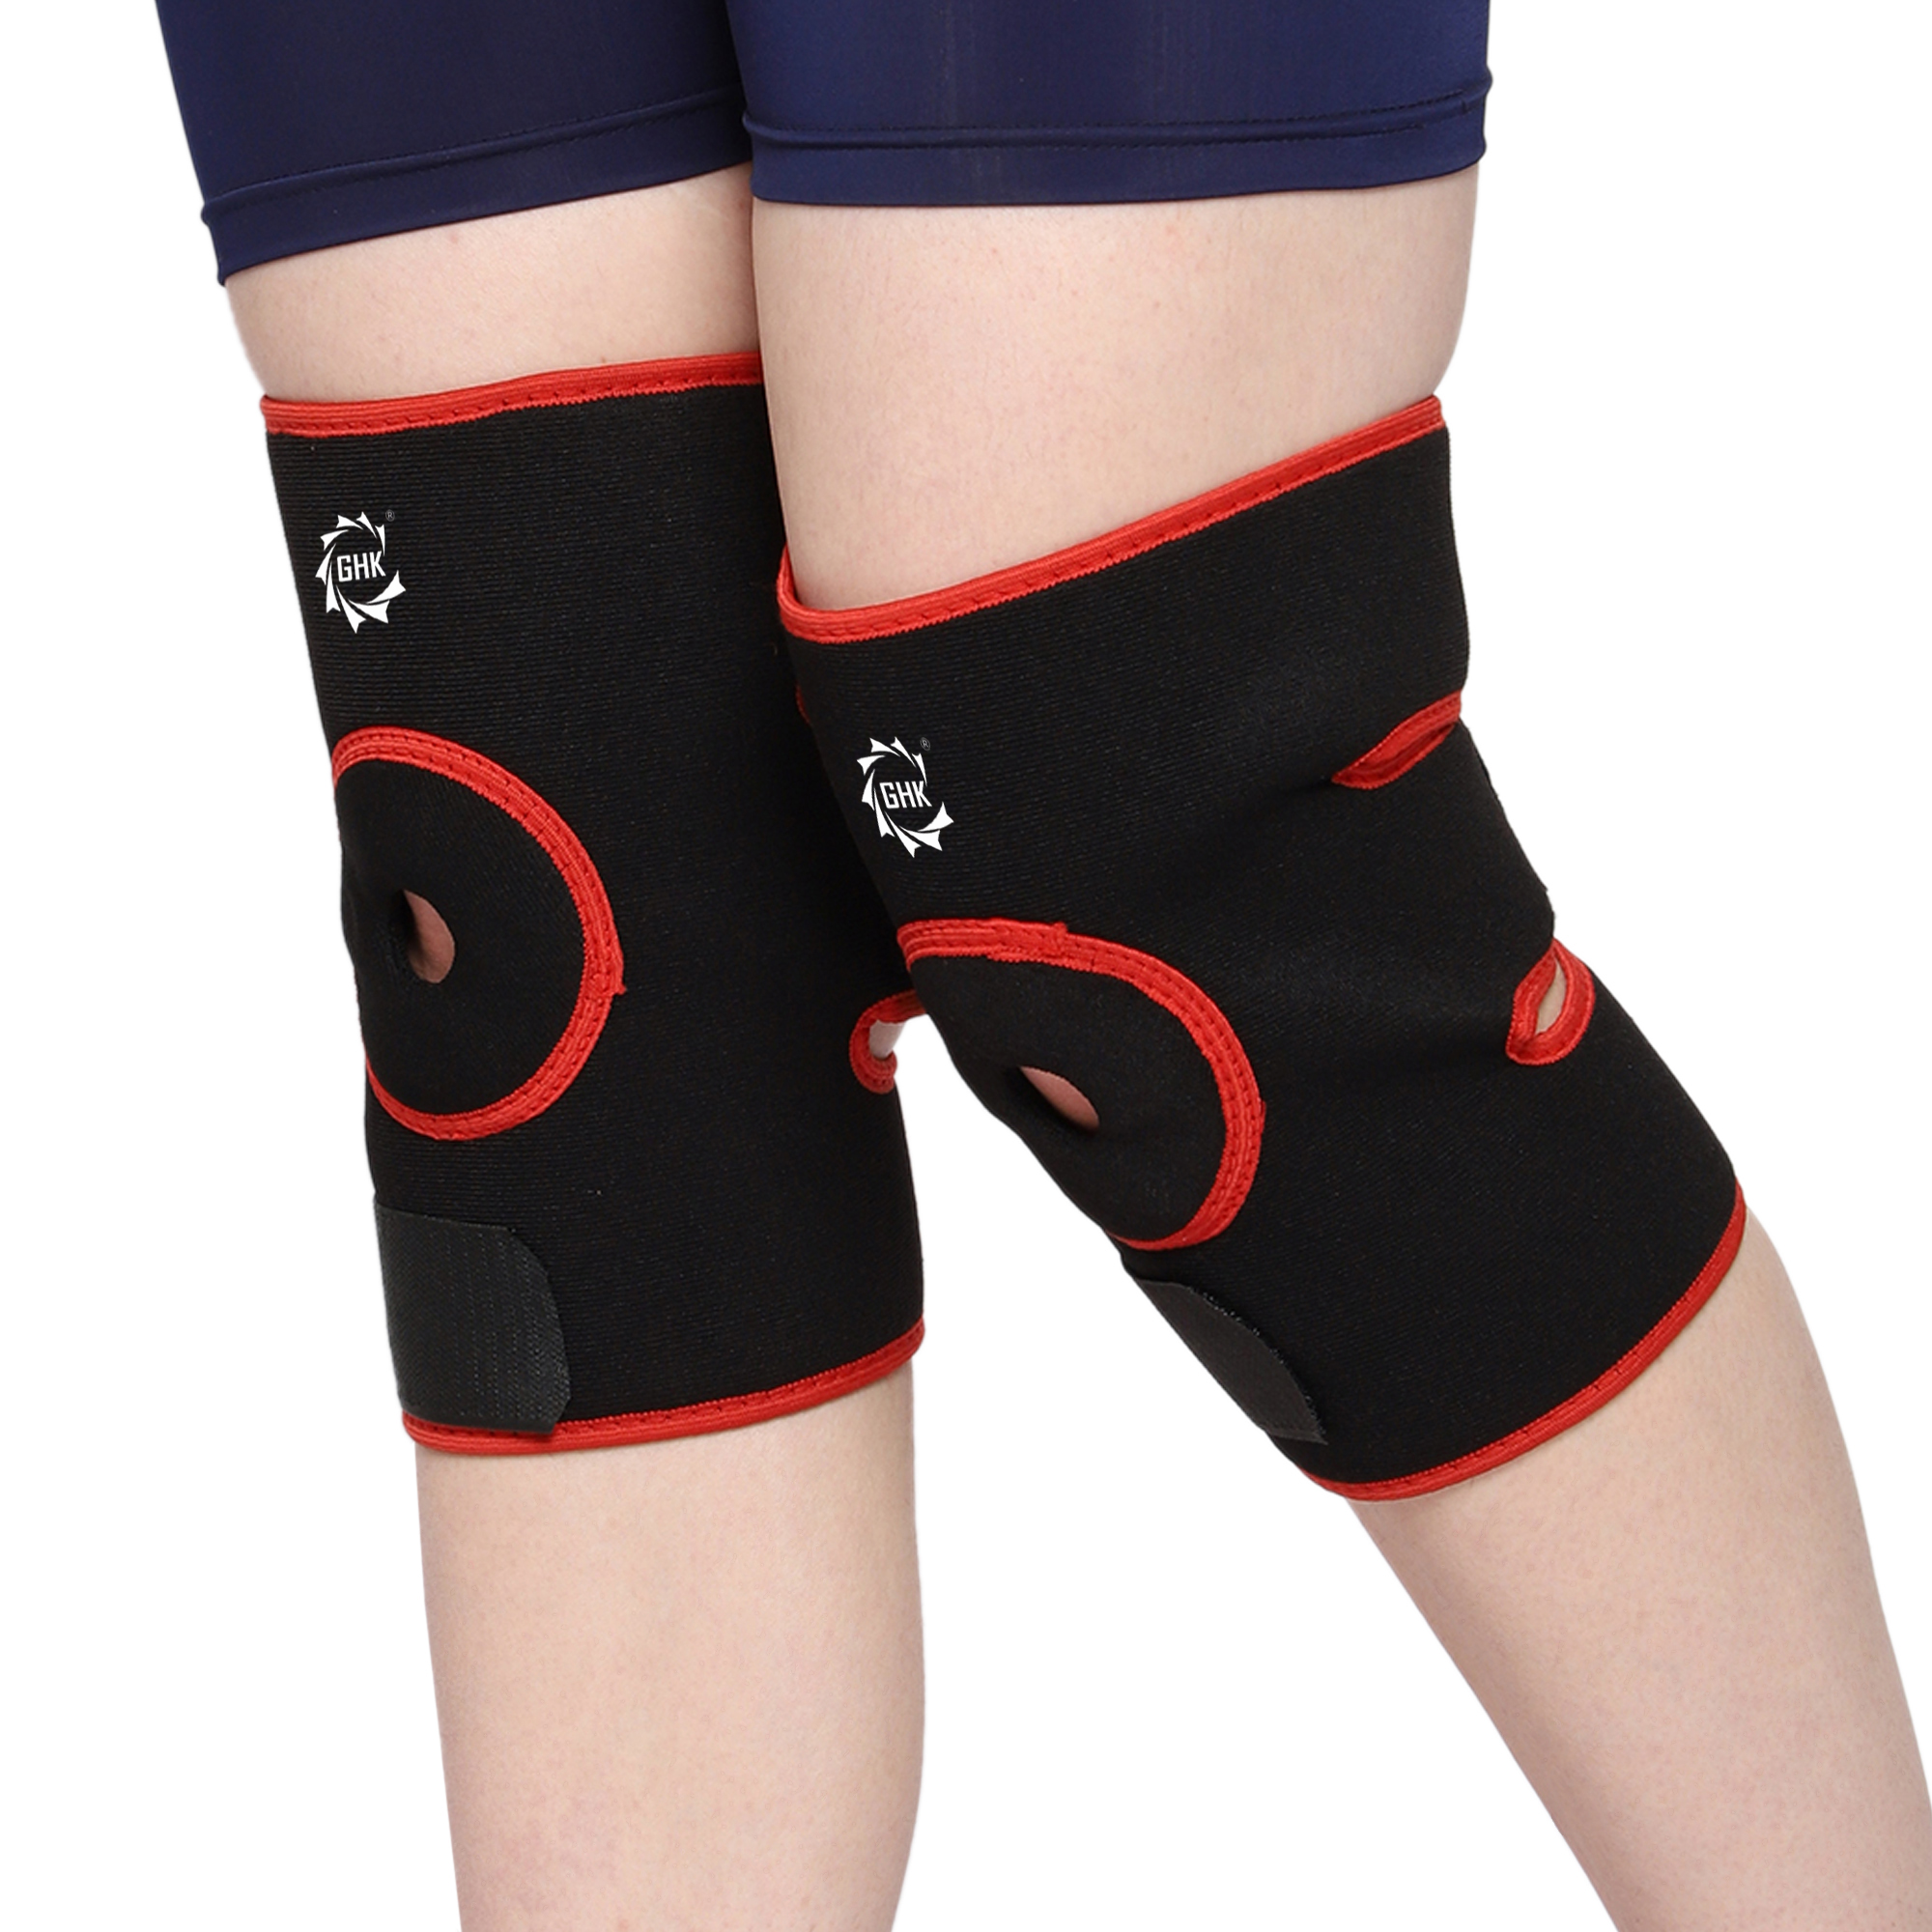 GHK S9 Knee Wrap Open Patella with Adjustable Strap for Complete Knee Support 1 Pair, Unisex, Universal Size